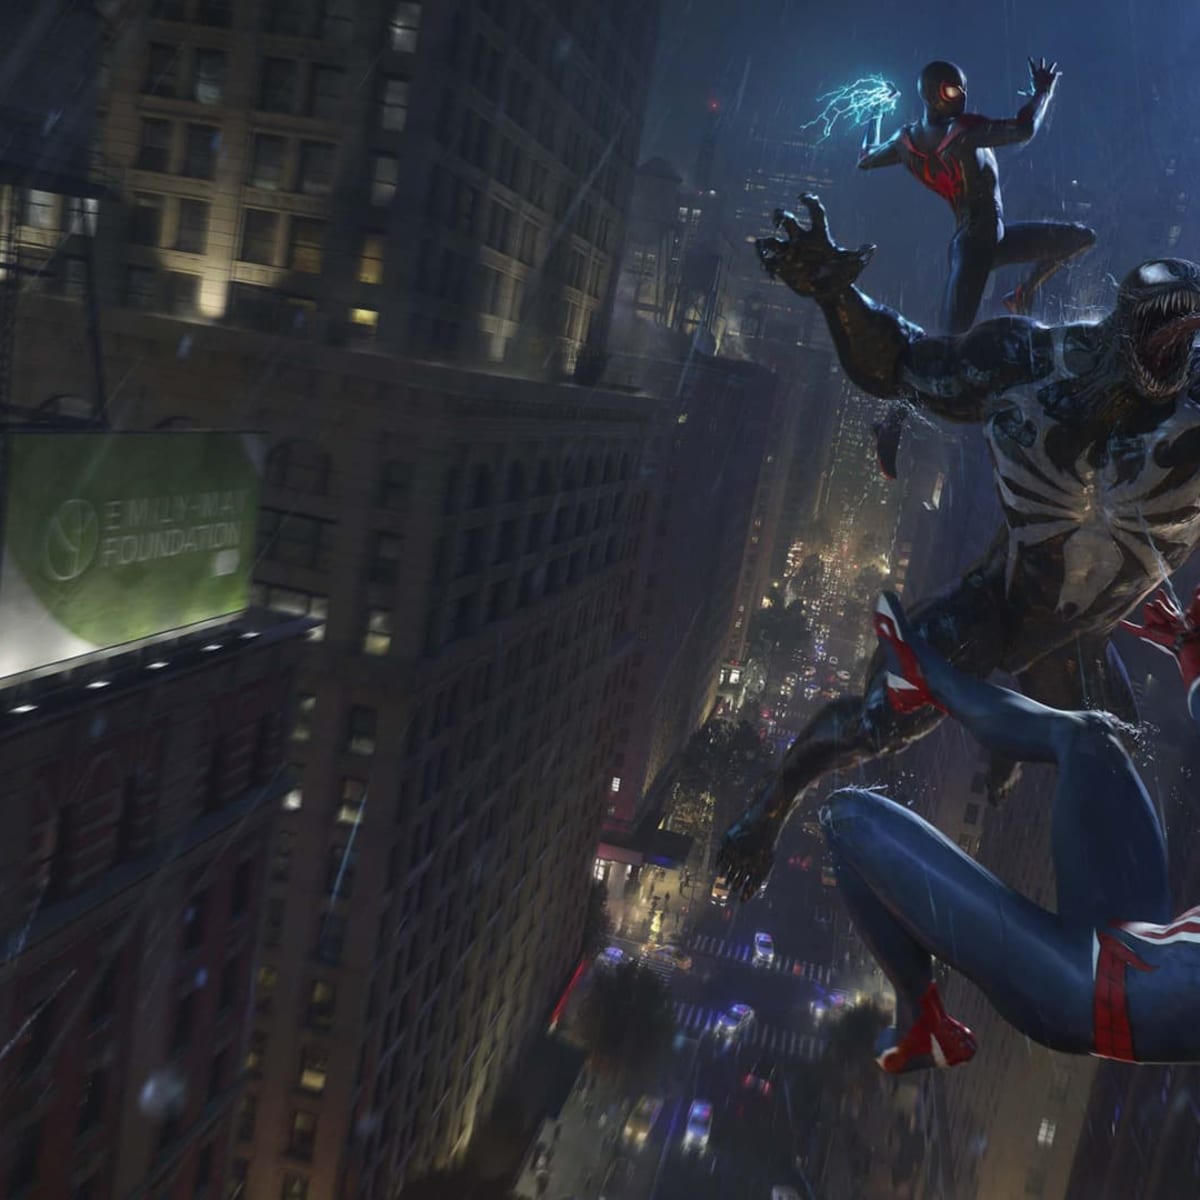 Marvel's Spider-Man 2 will have New Game Plus